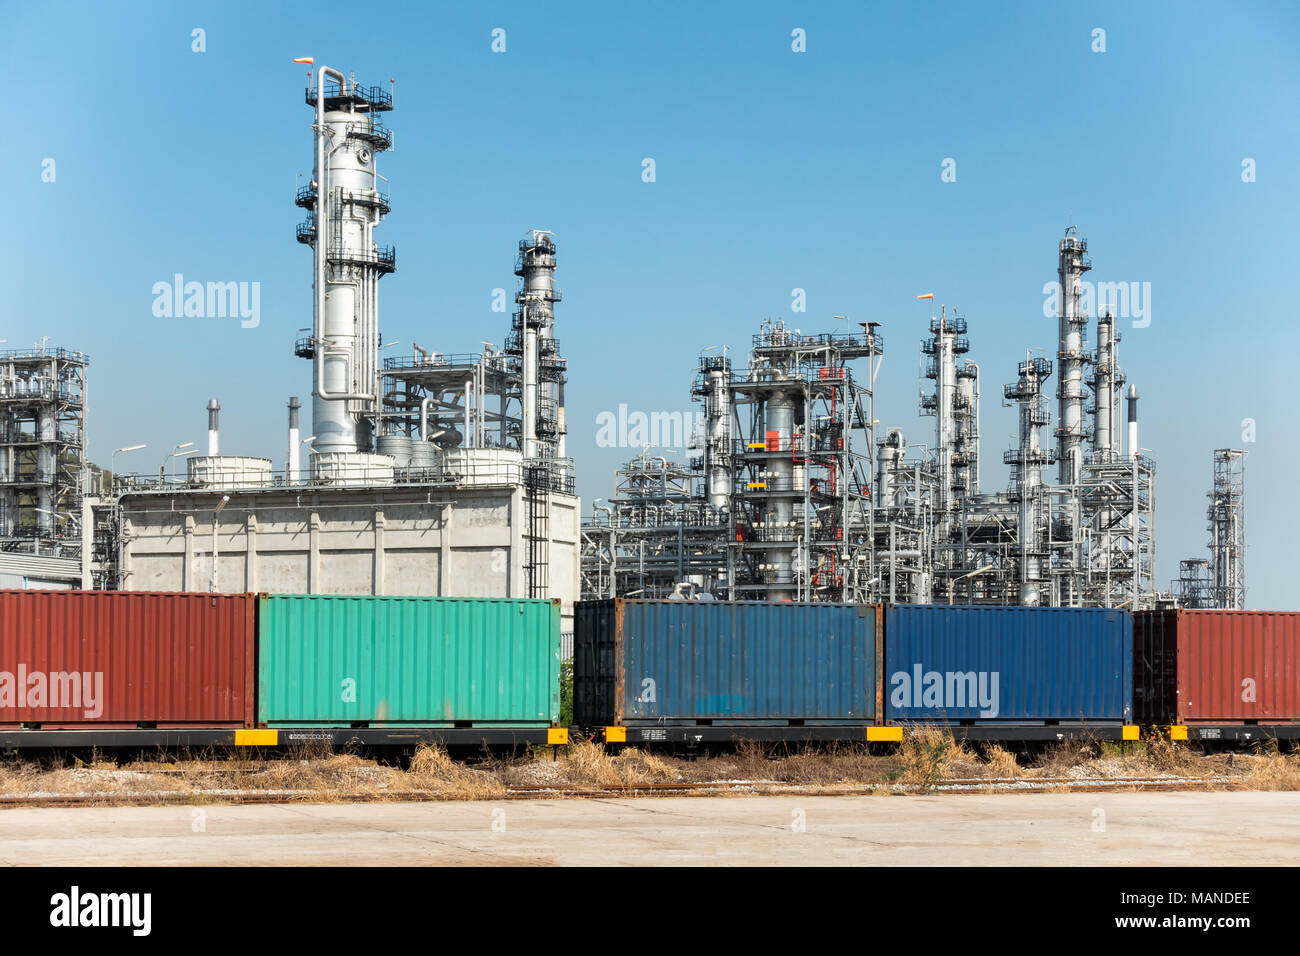 oil refinery and container shipping on daylight Stock Photo